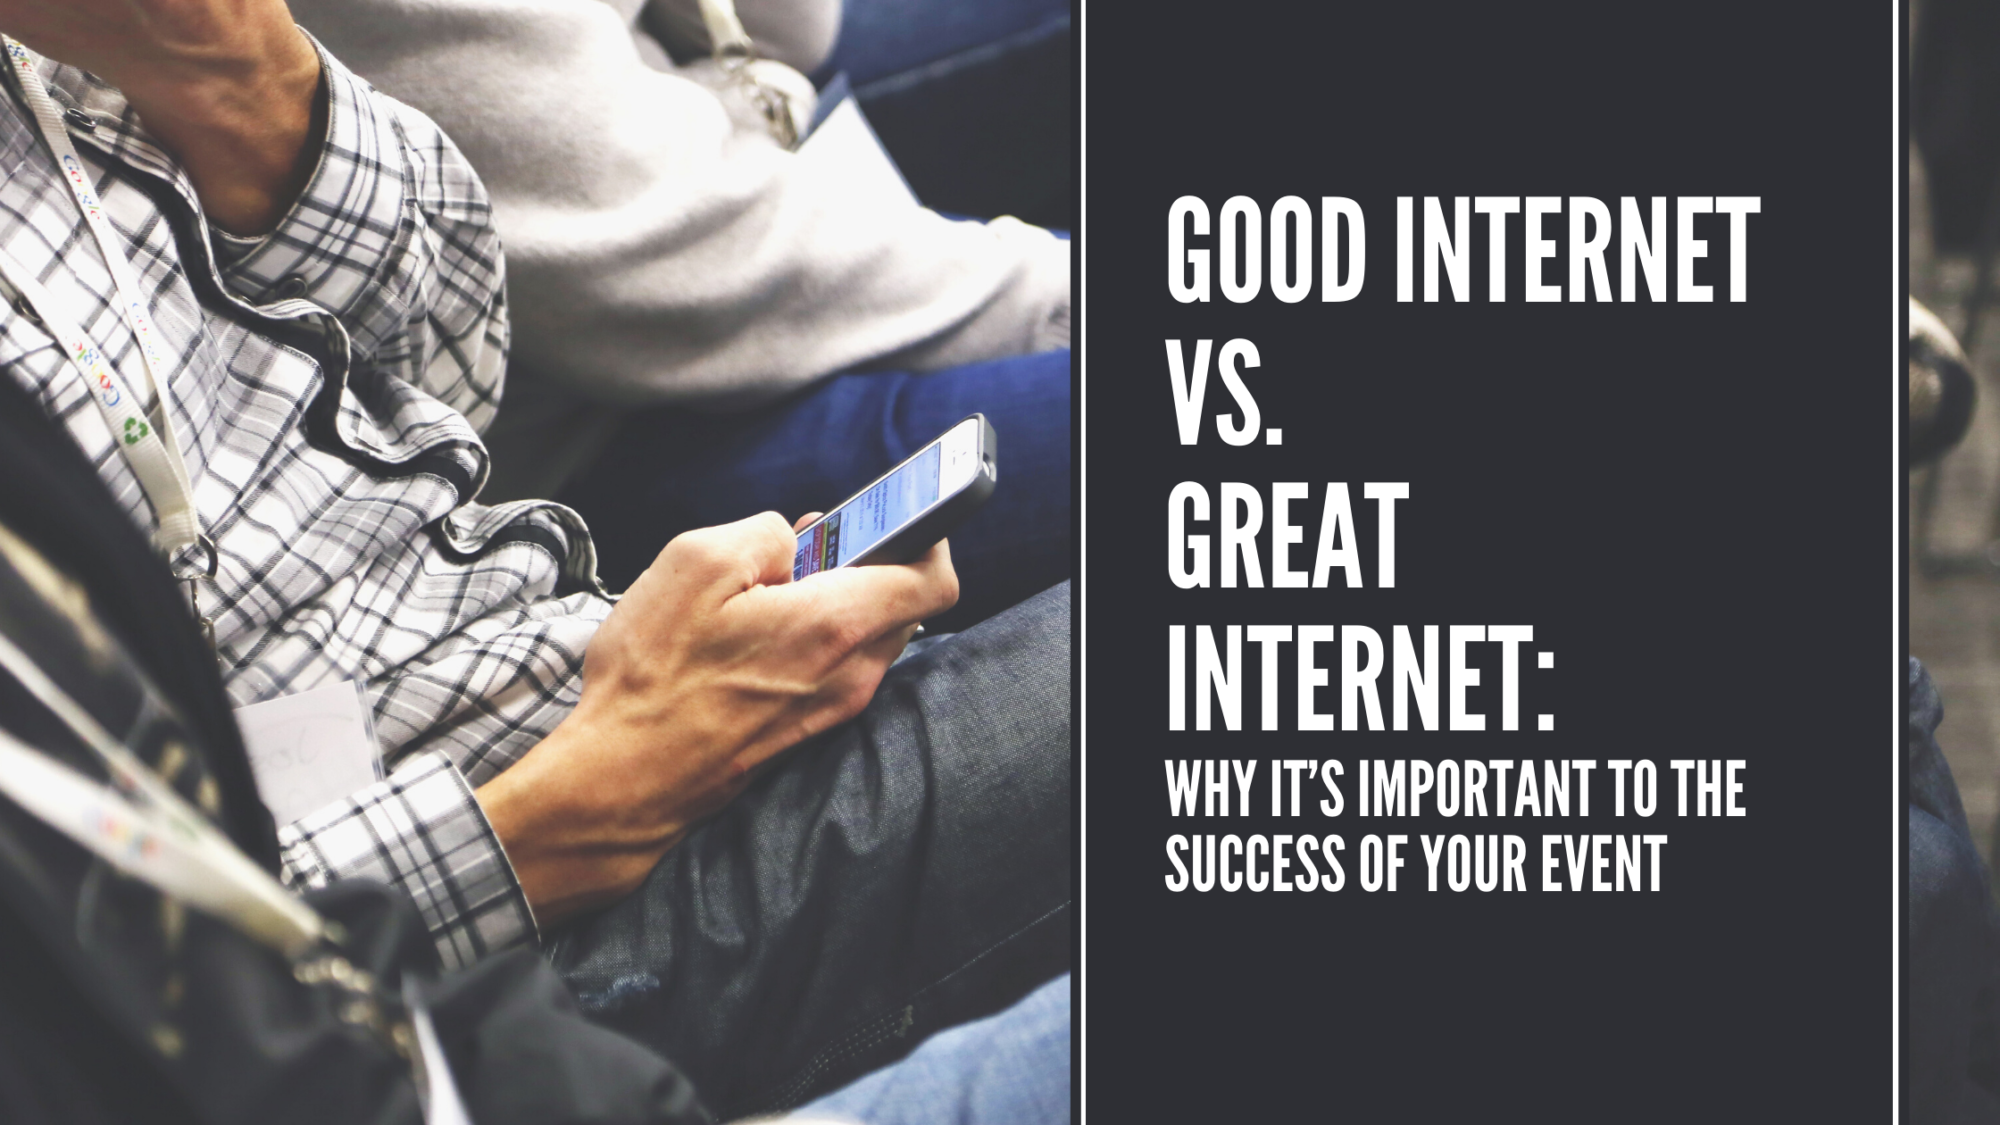 Good Internet vs. Great Internet: Why it’s important to the success of your event